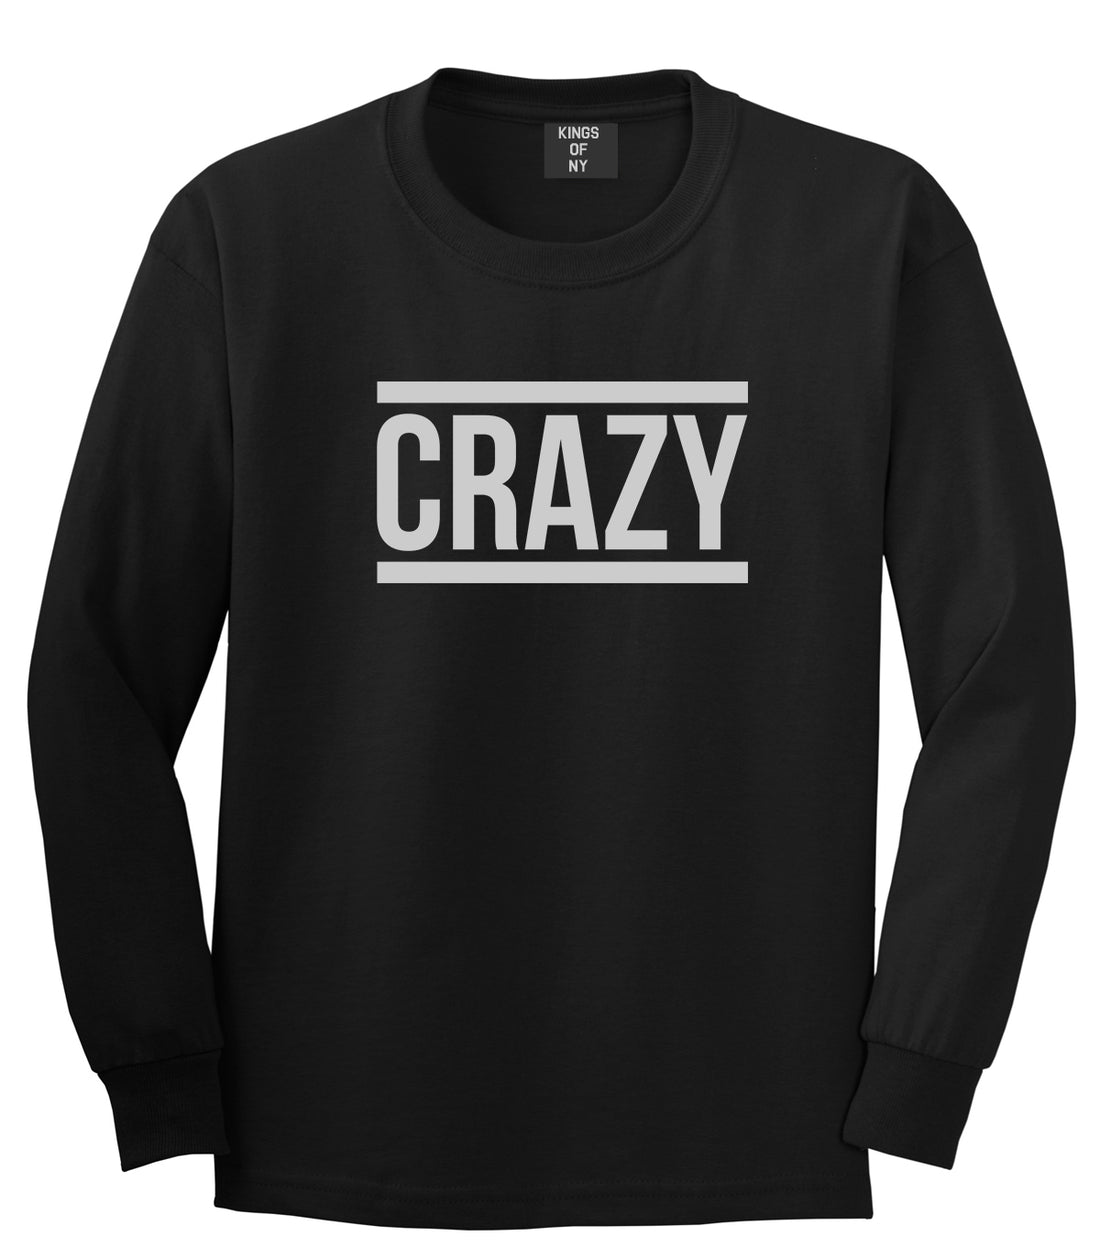 Crazy Black Long Sleeve T-Shirt by Kings Of NY